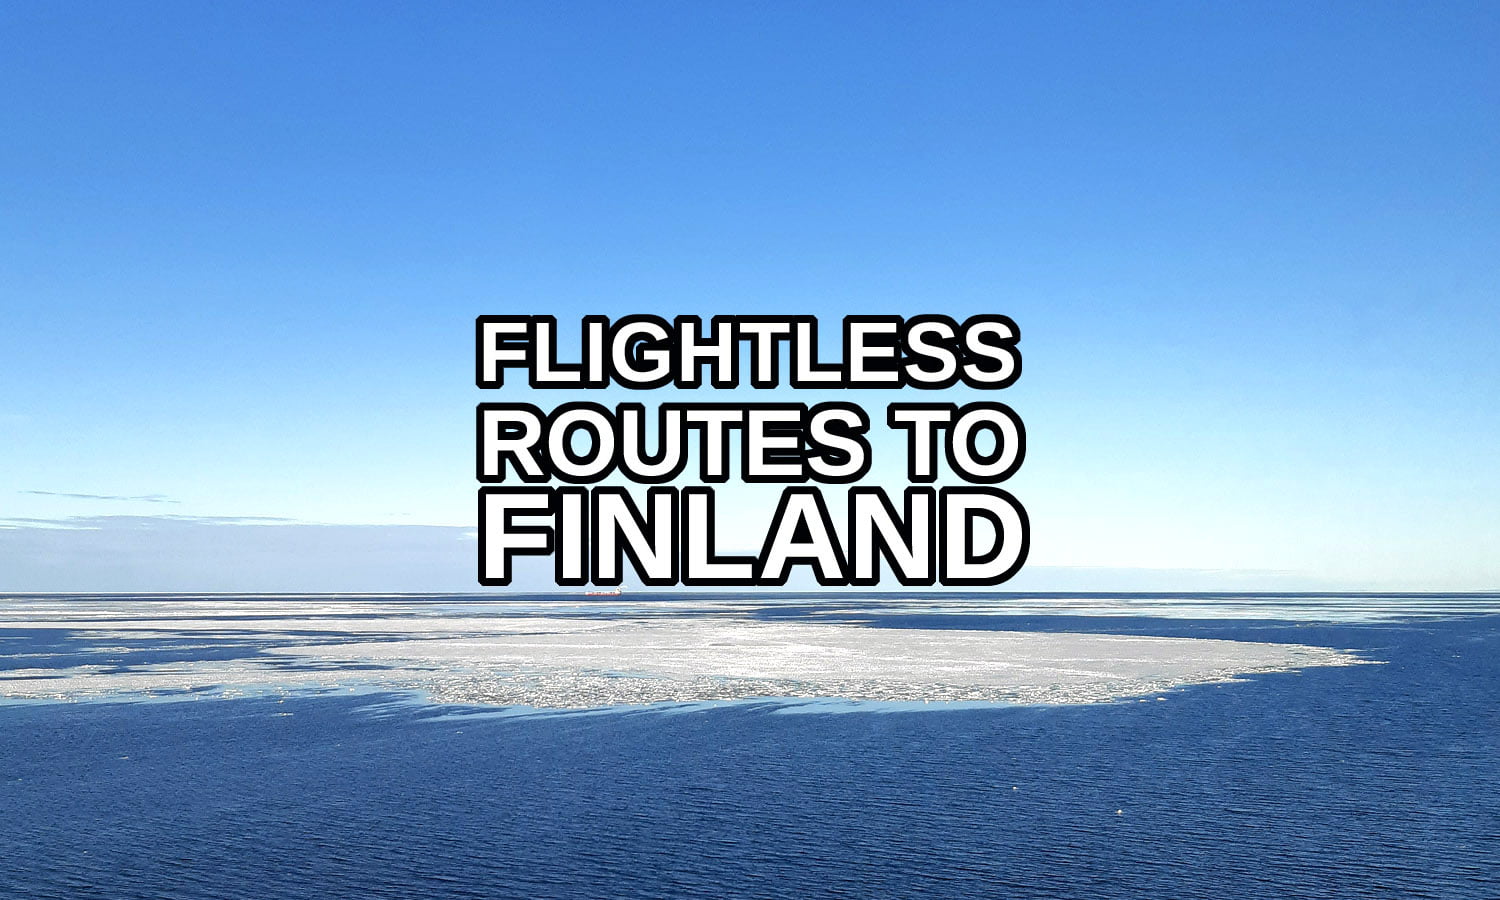 Flightless routes to finland by ship train bus